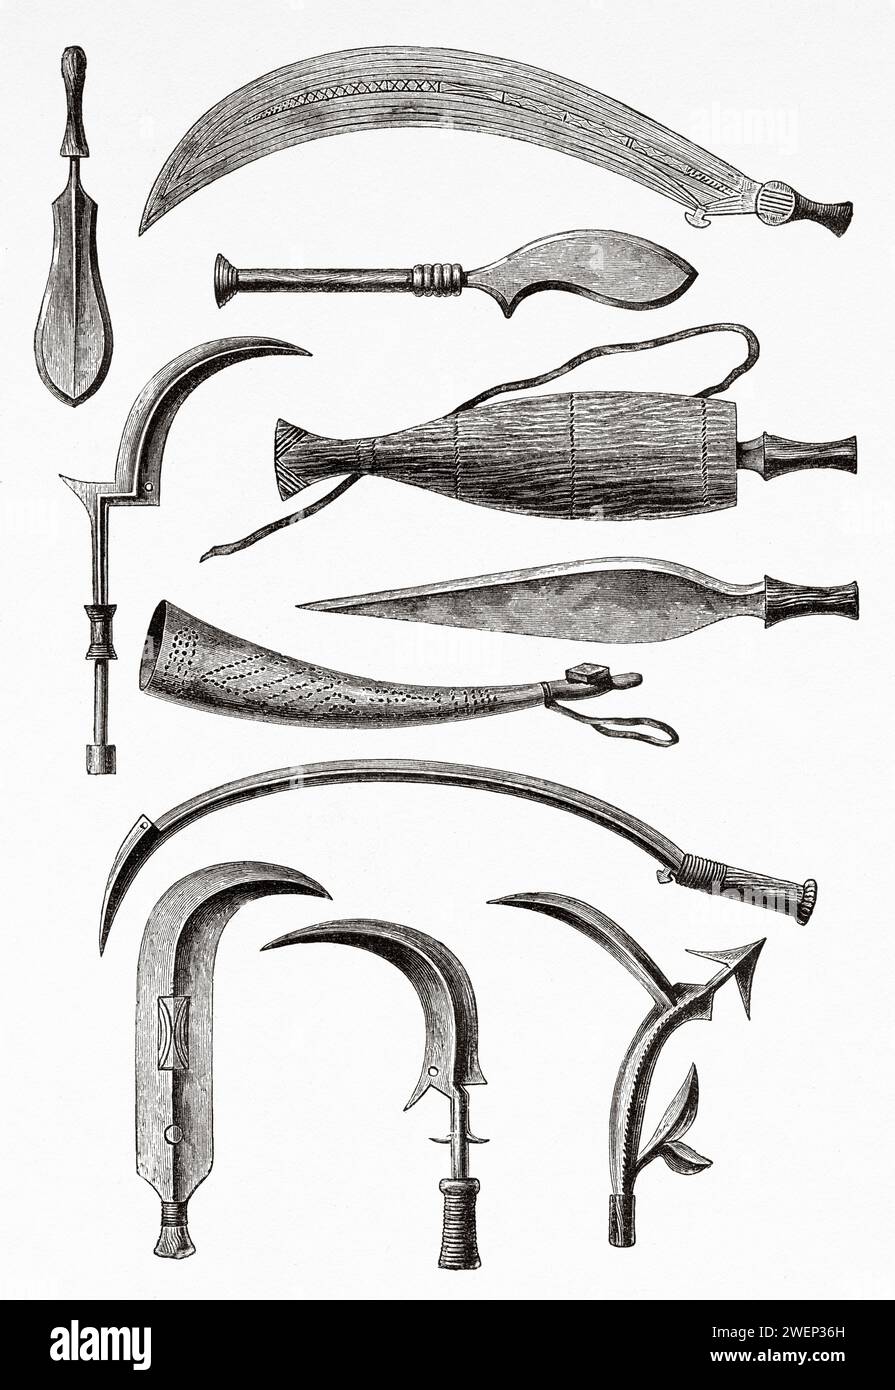 Swords, knives and various weapons of ivory horn. Africa. Emin Pasha Relief Expedition 1886-1889 by Henry Morton Stanley (1841 - 1904) Old 19th century engraving from Le Tour du Monde 1890 Stock Photo